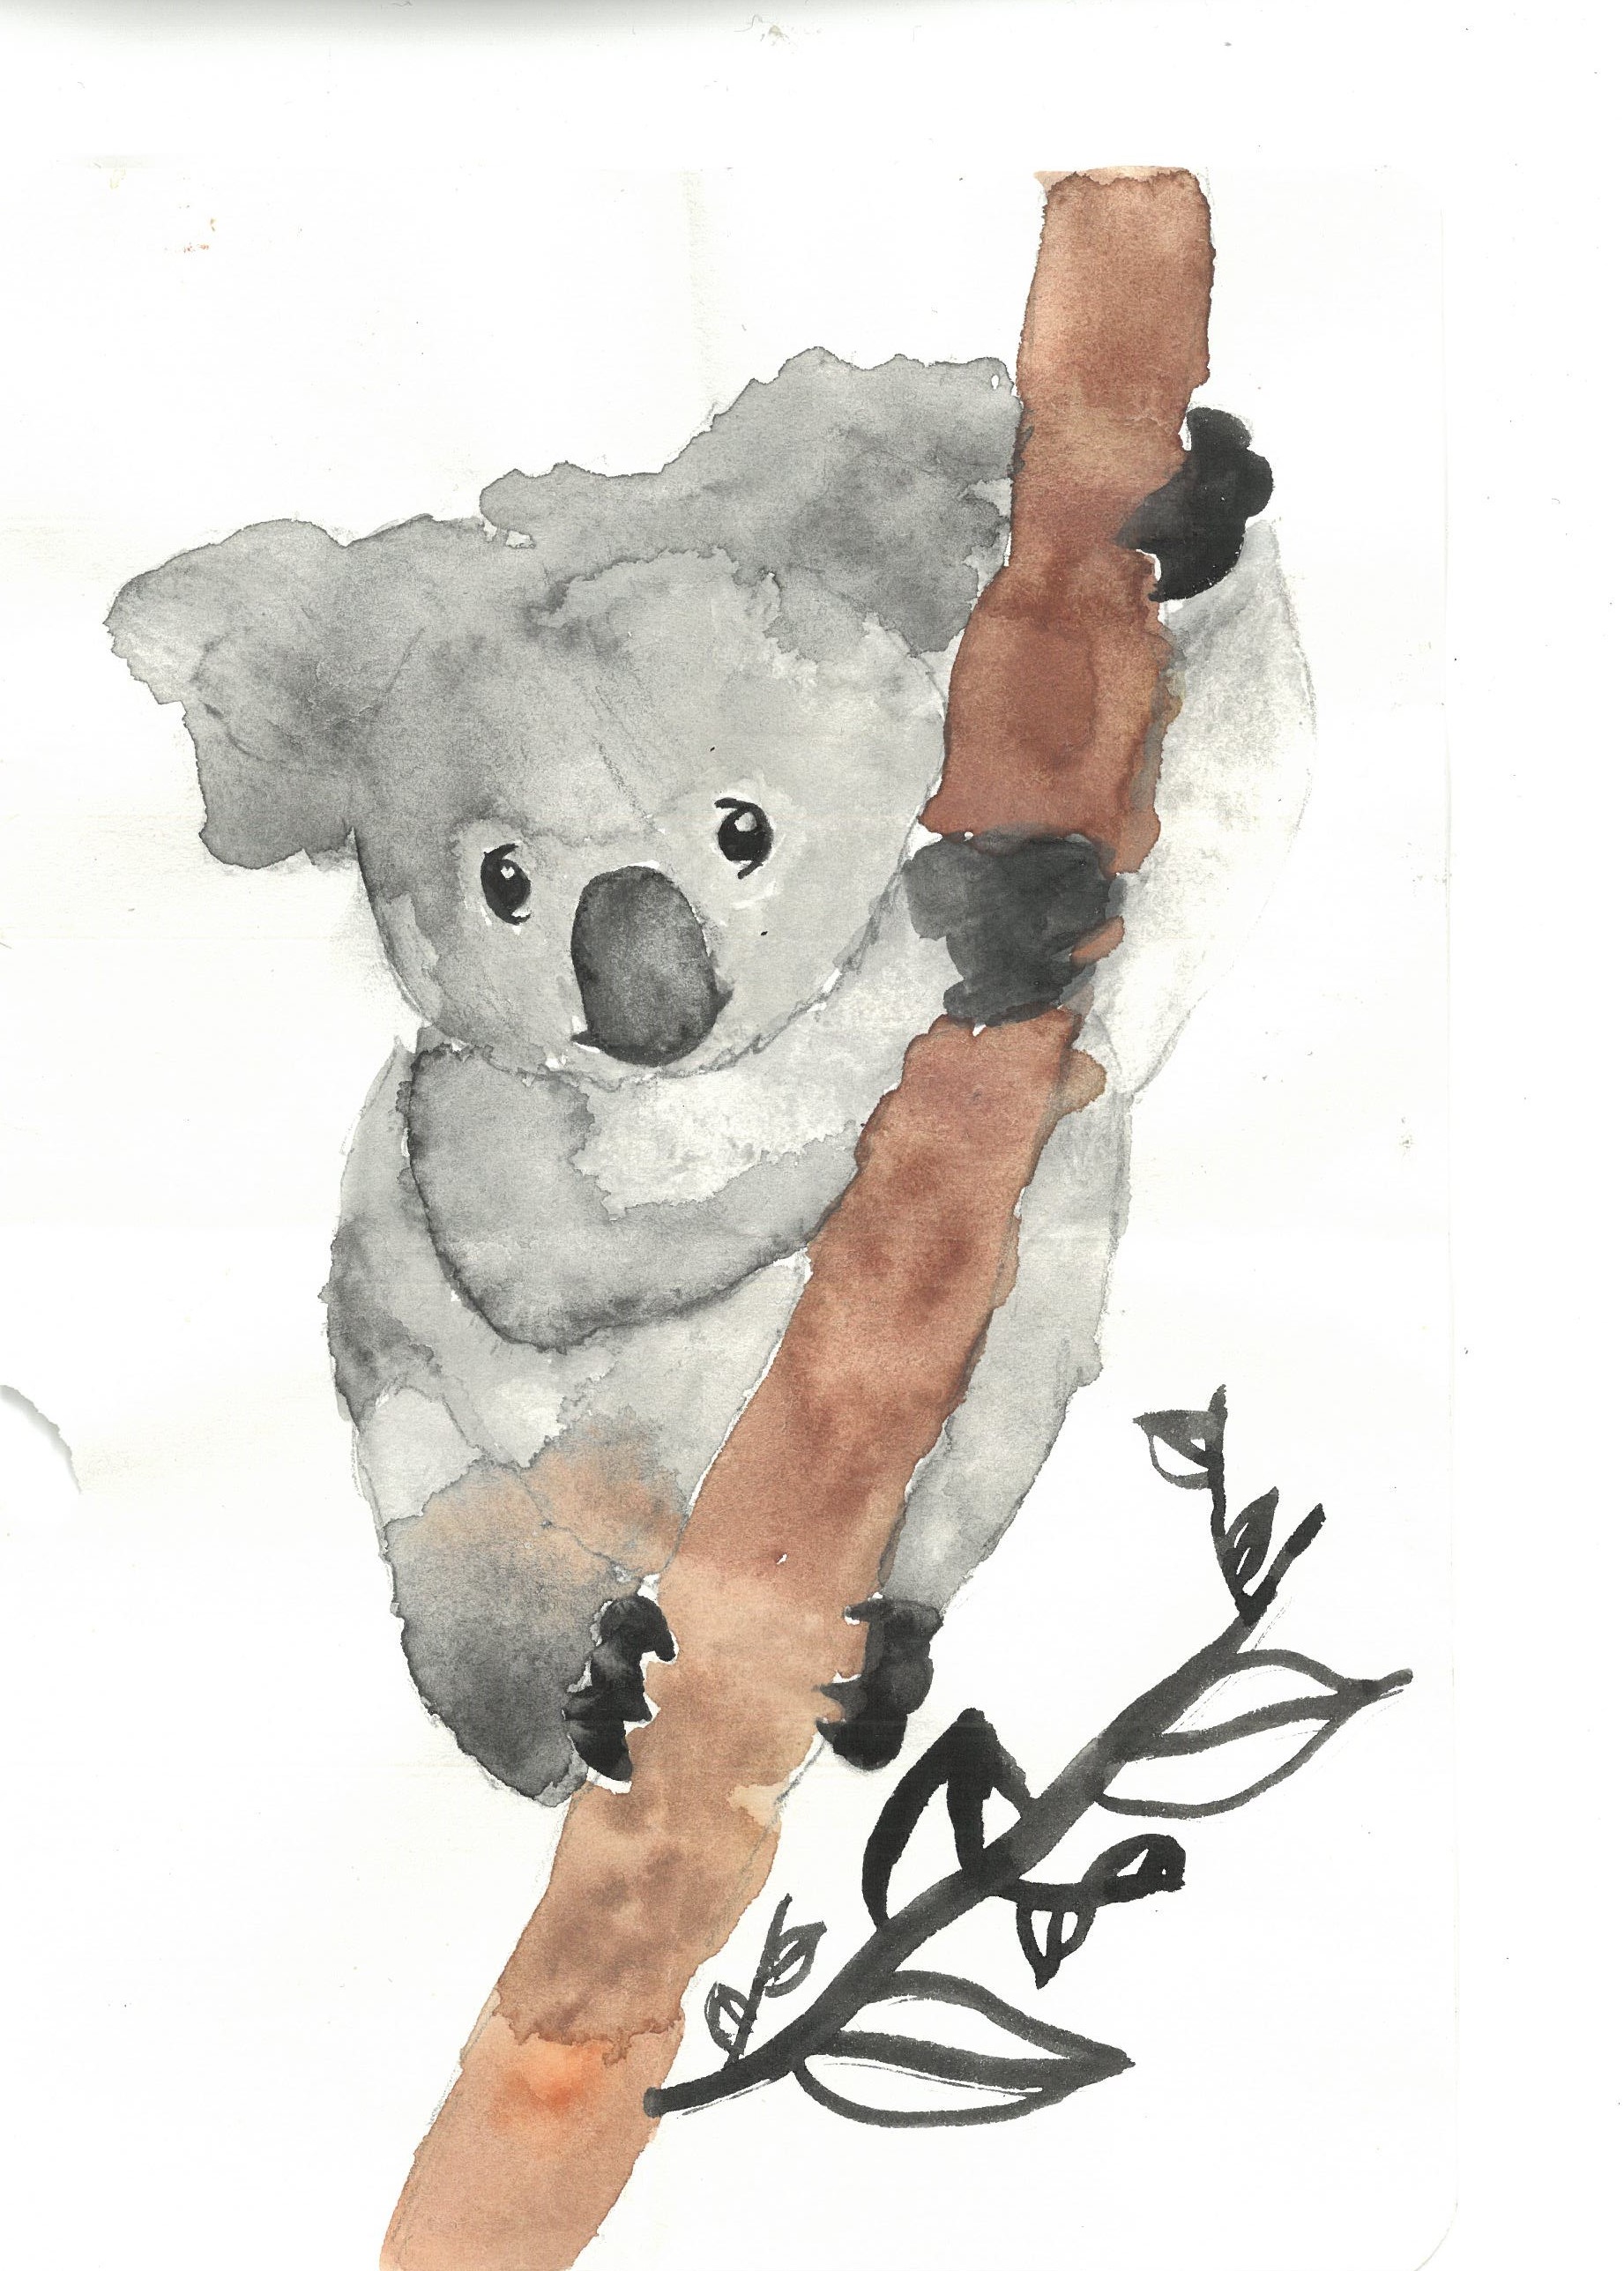 Watercolour painting of a koala on a brown tree branch.